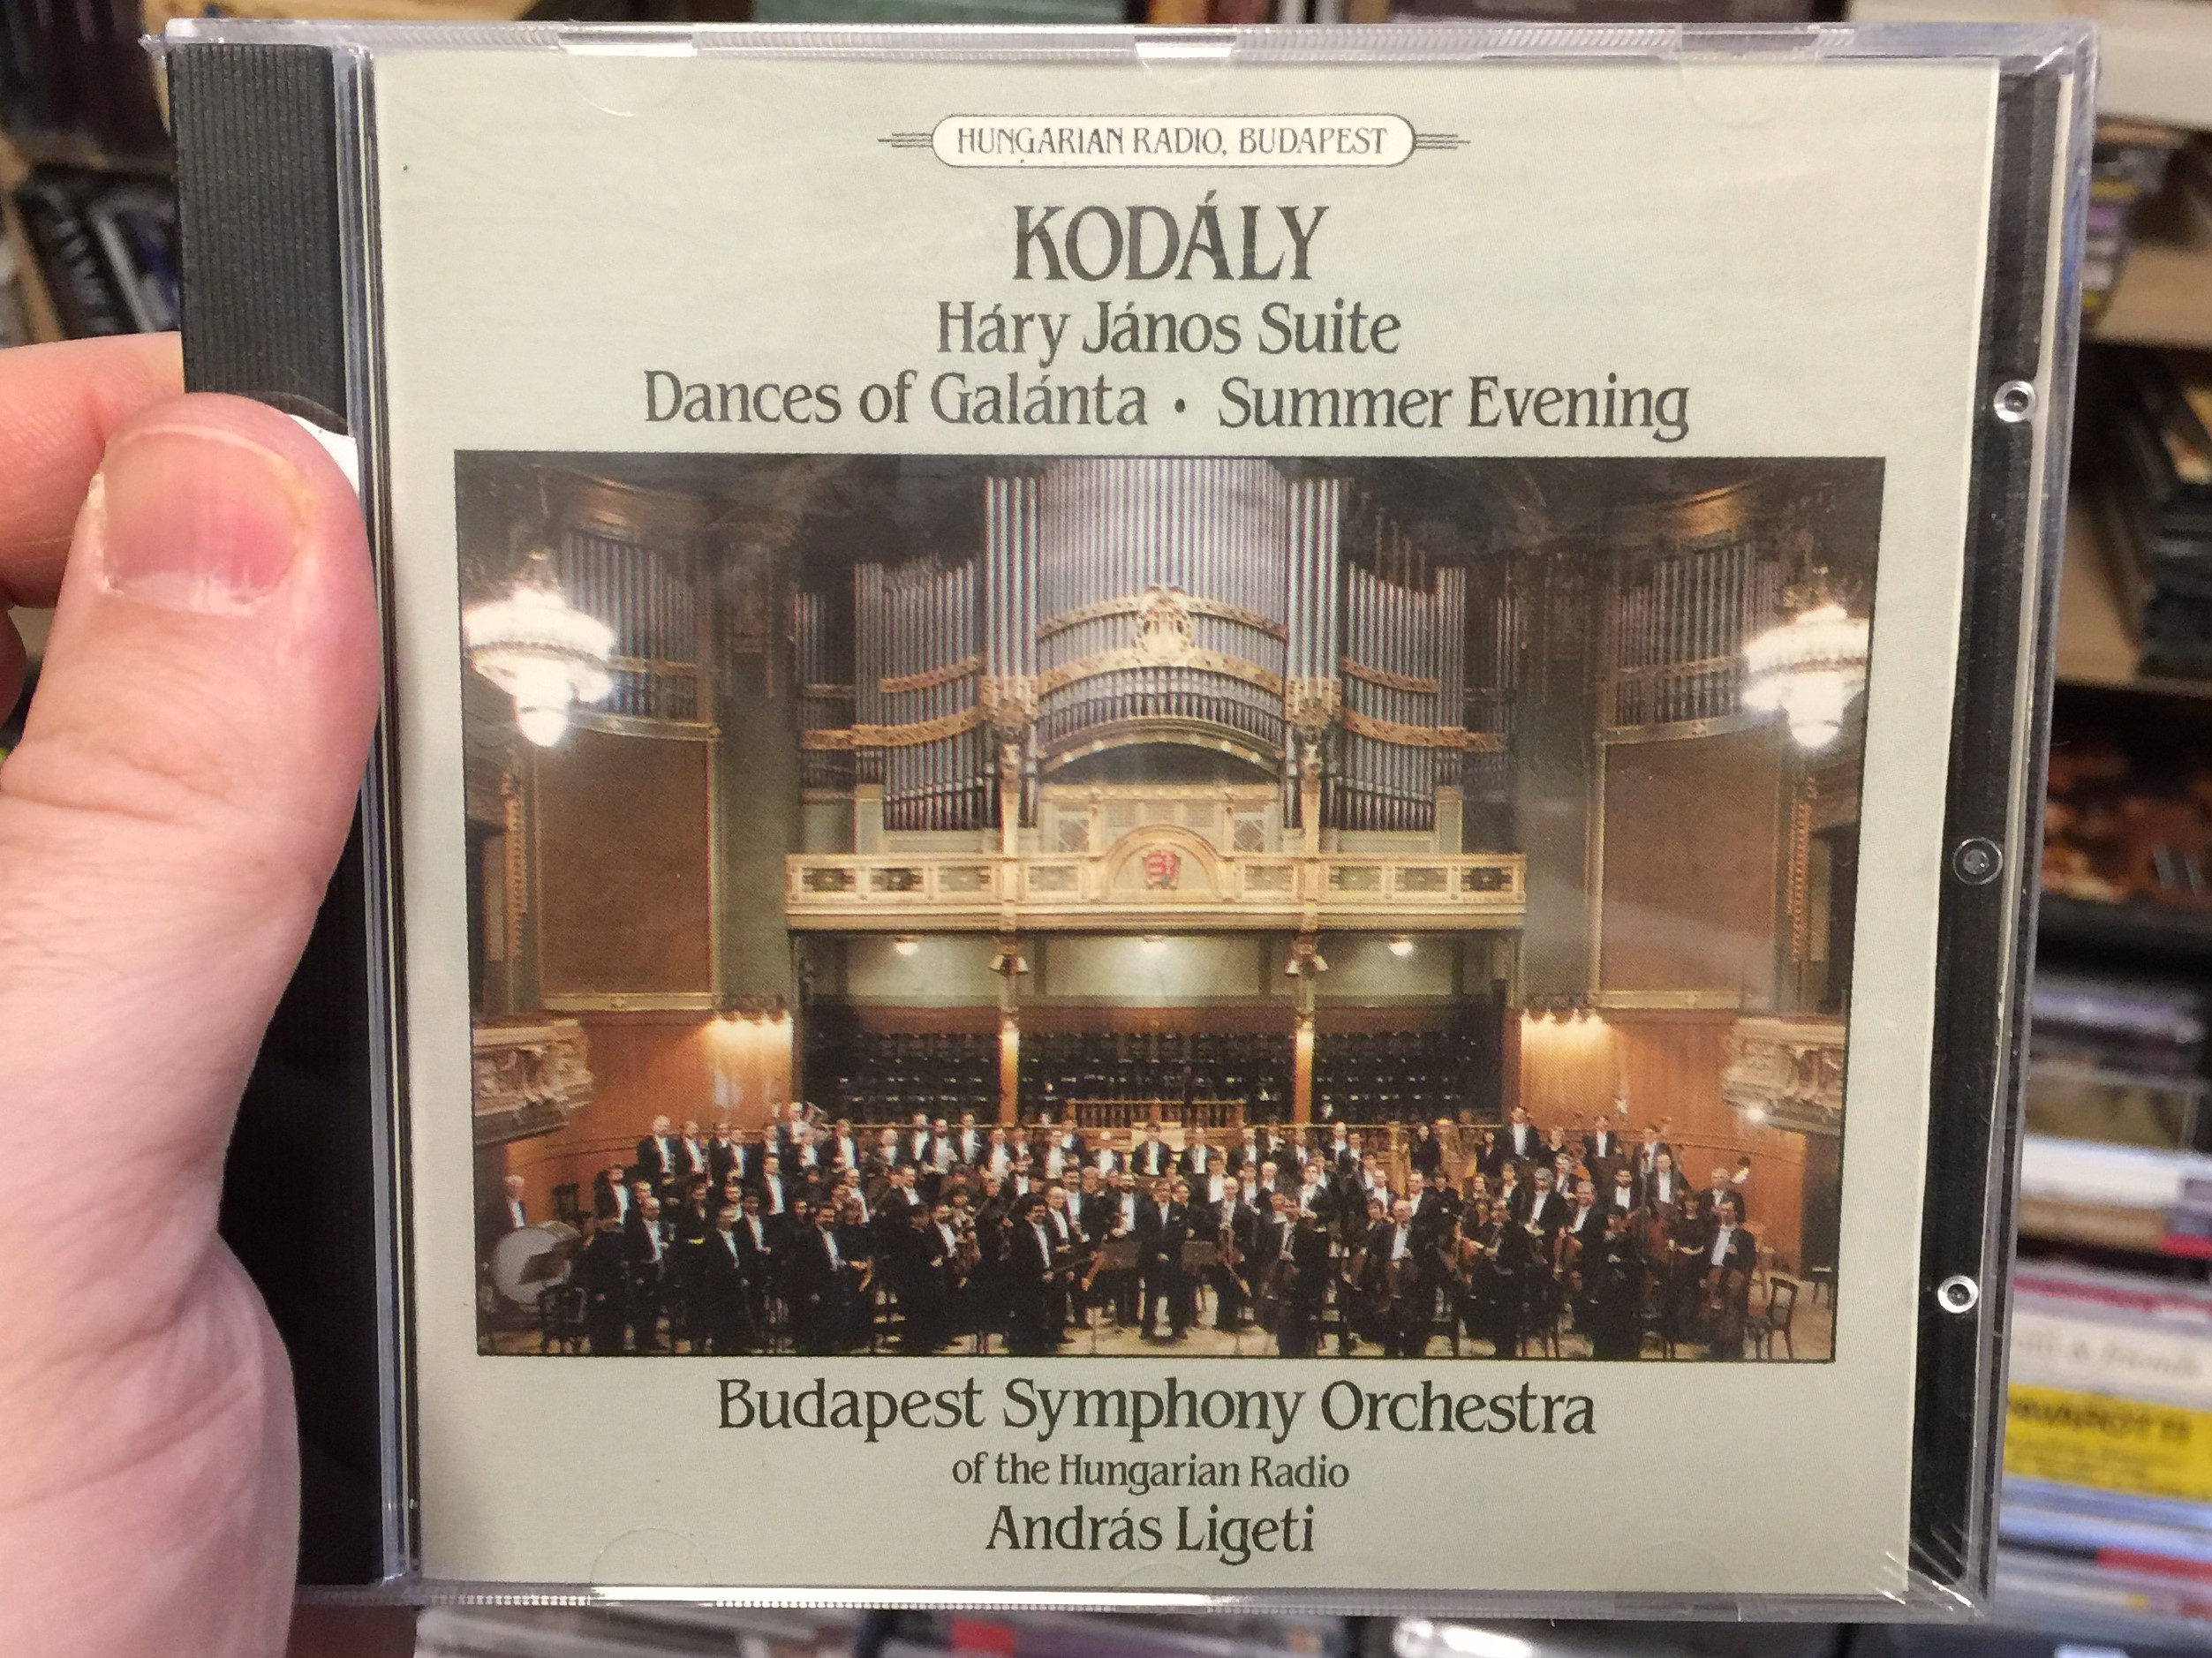 kod-ly-h-ry-j-nos-suite-dances-of-gal-nta-summer-evening-budapest-symphony-orchestra-of-the-hungarian-radio-andr-s-ligeti-hungaroton-audio-cd-1991-stereo-kr-2214-1-1-.jpg